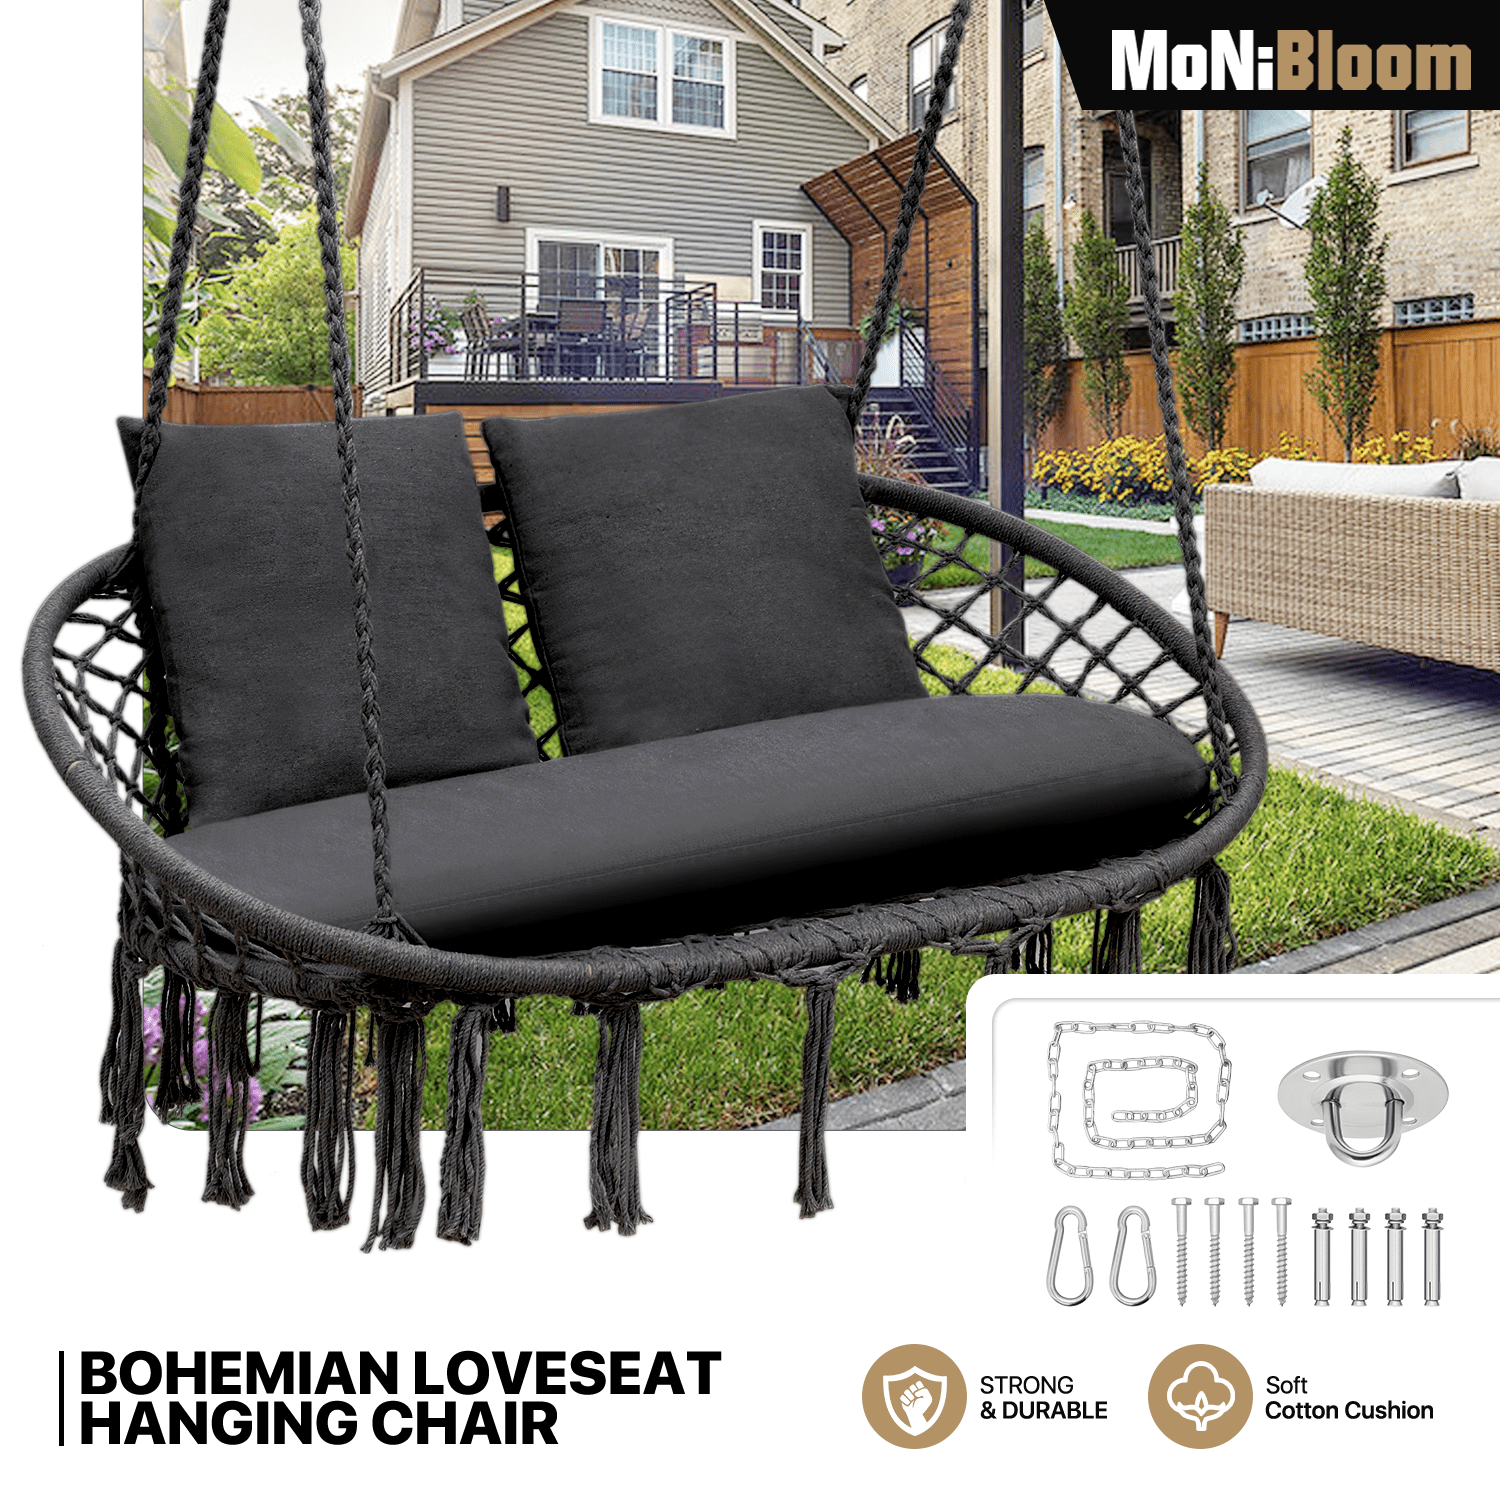 

Double Swing Chair With 3 Cushions For Outside, Large Hanging Macrame Swing Chair For Indoor/outdoor Relax, Adult Hammock Boho Chair Max 700 Lbs Capacity For Porch Balcony Backyard